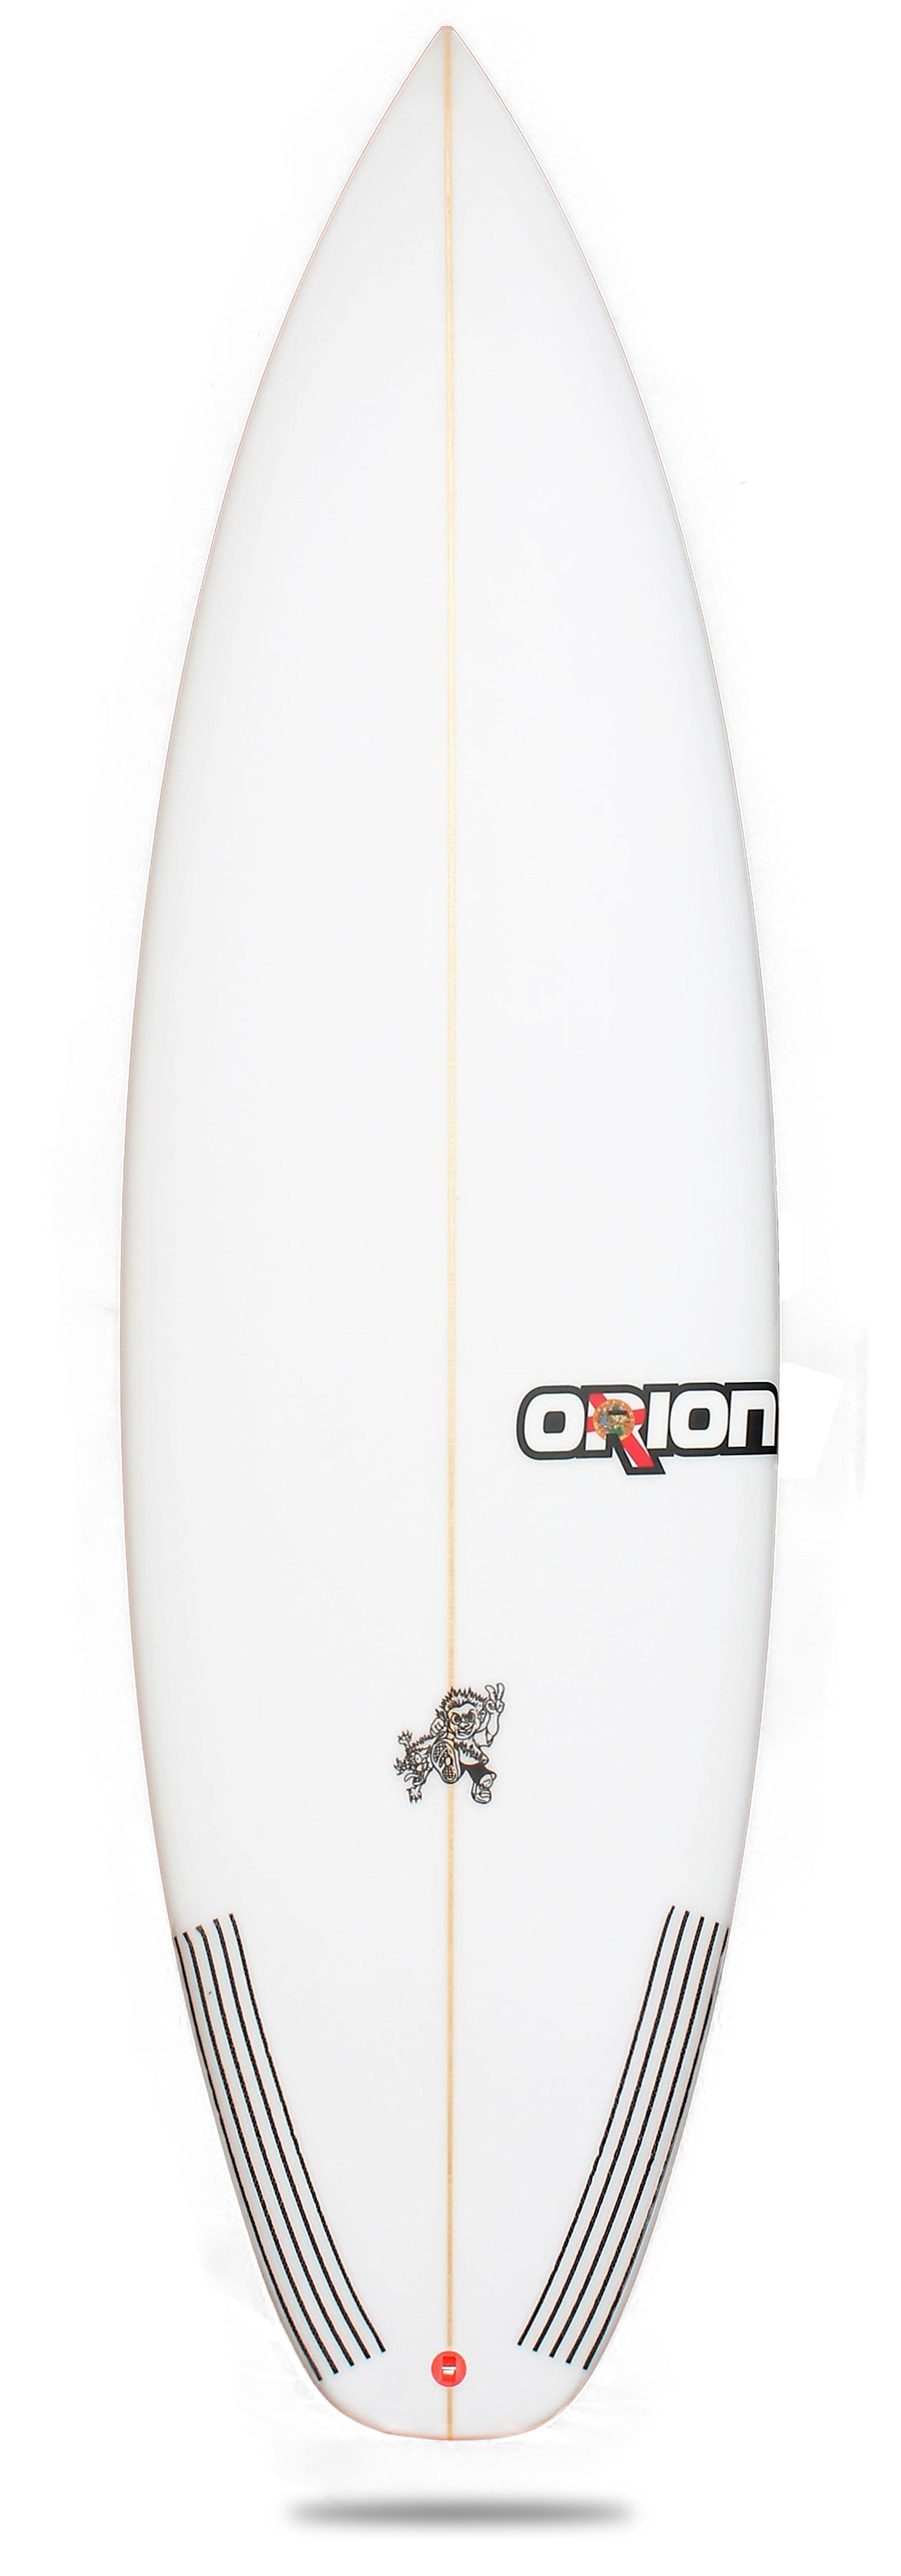 Orion Surfboards Menace 2 Tri-Fin FCS2 5ft10in